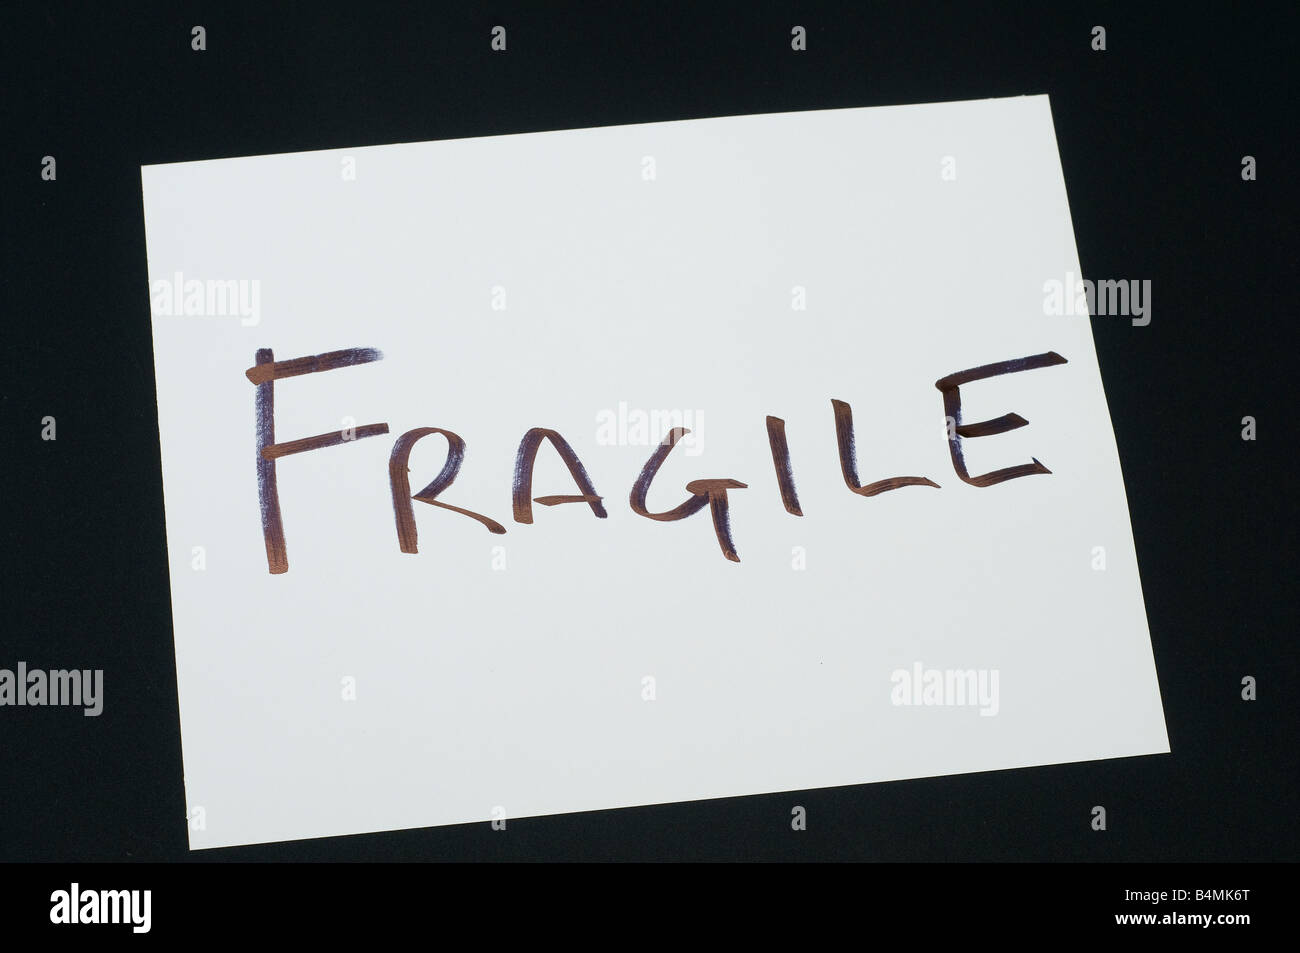 a note with the word Fragile on a black background Stock Photo